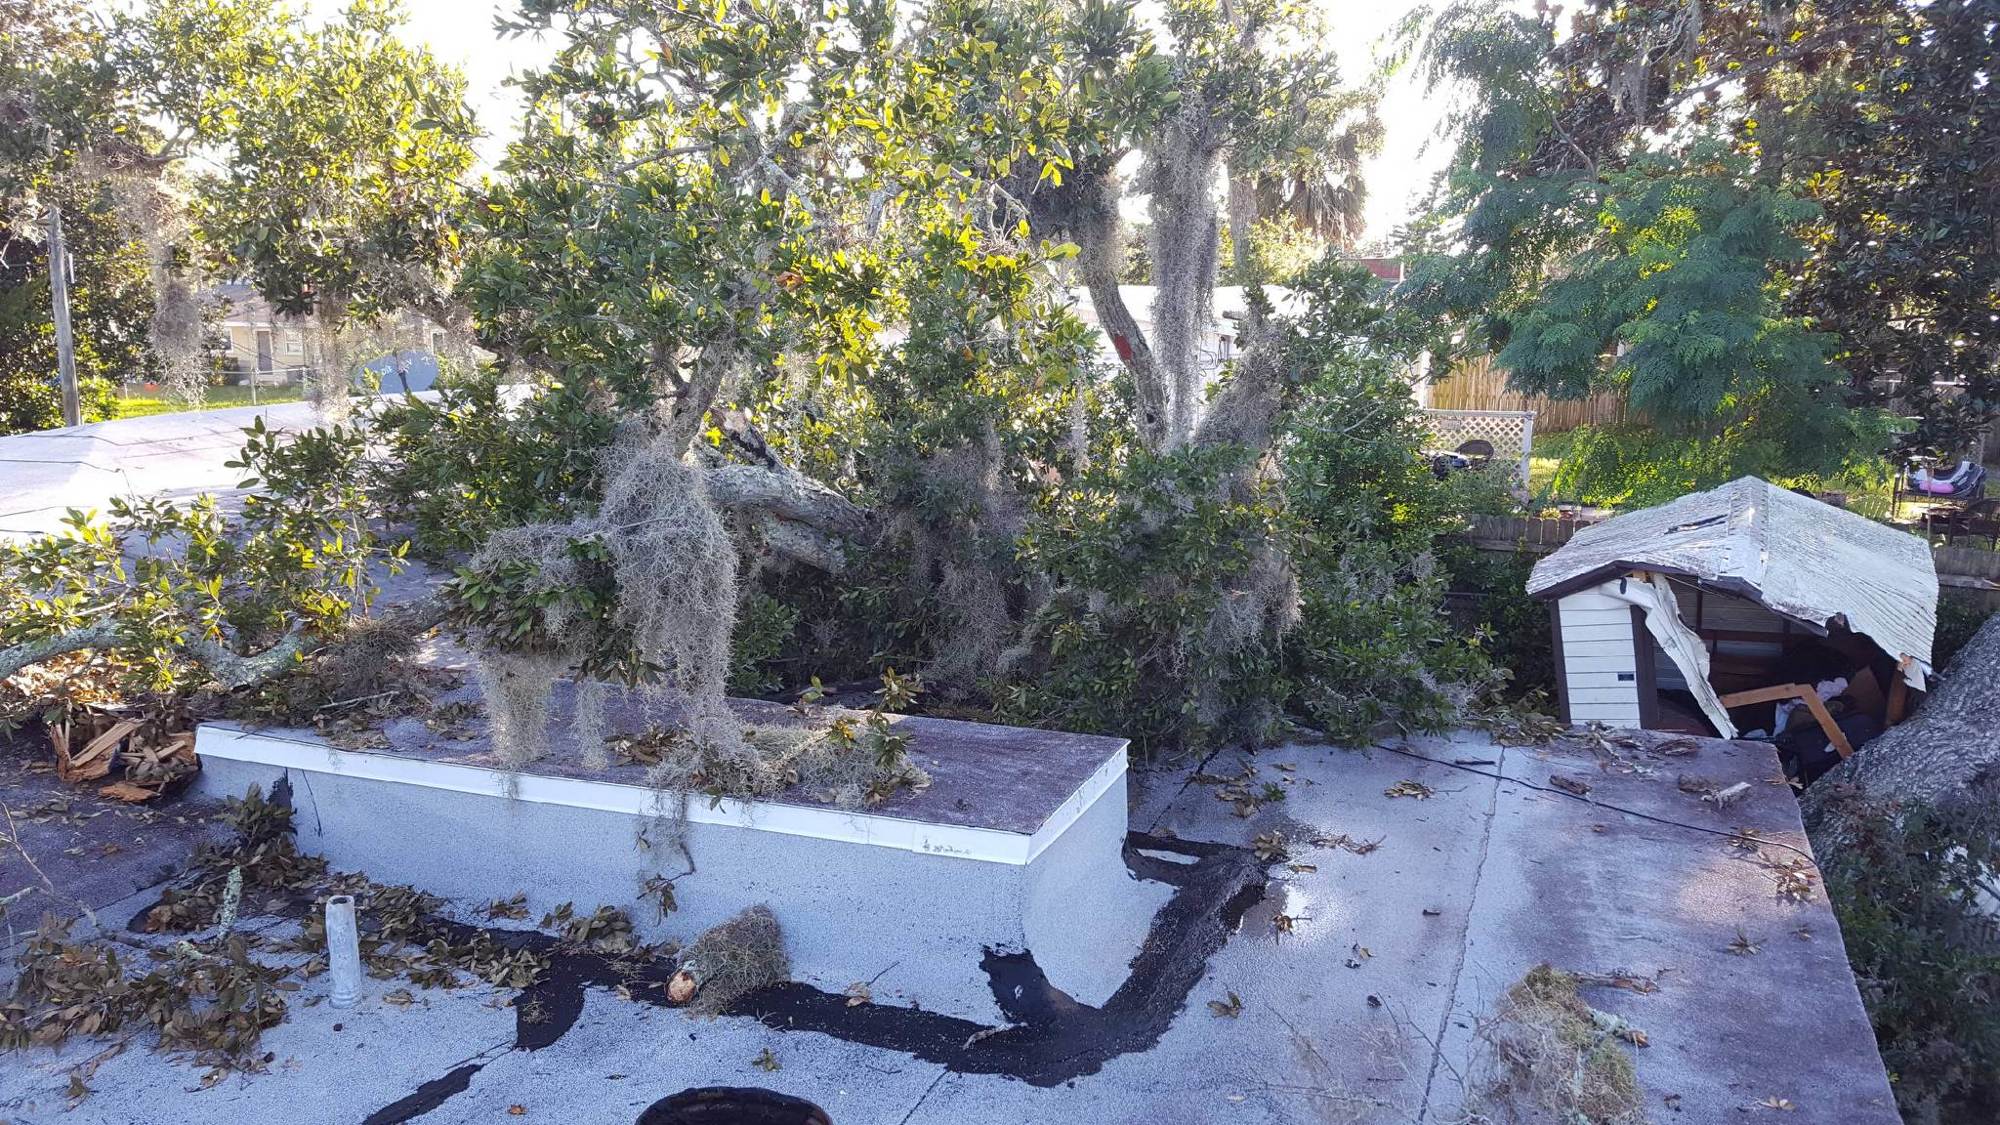 Volunteers helped clear damage to a local property owner's roof. Courtesy photo